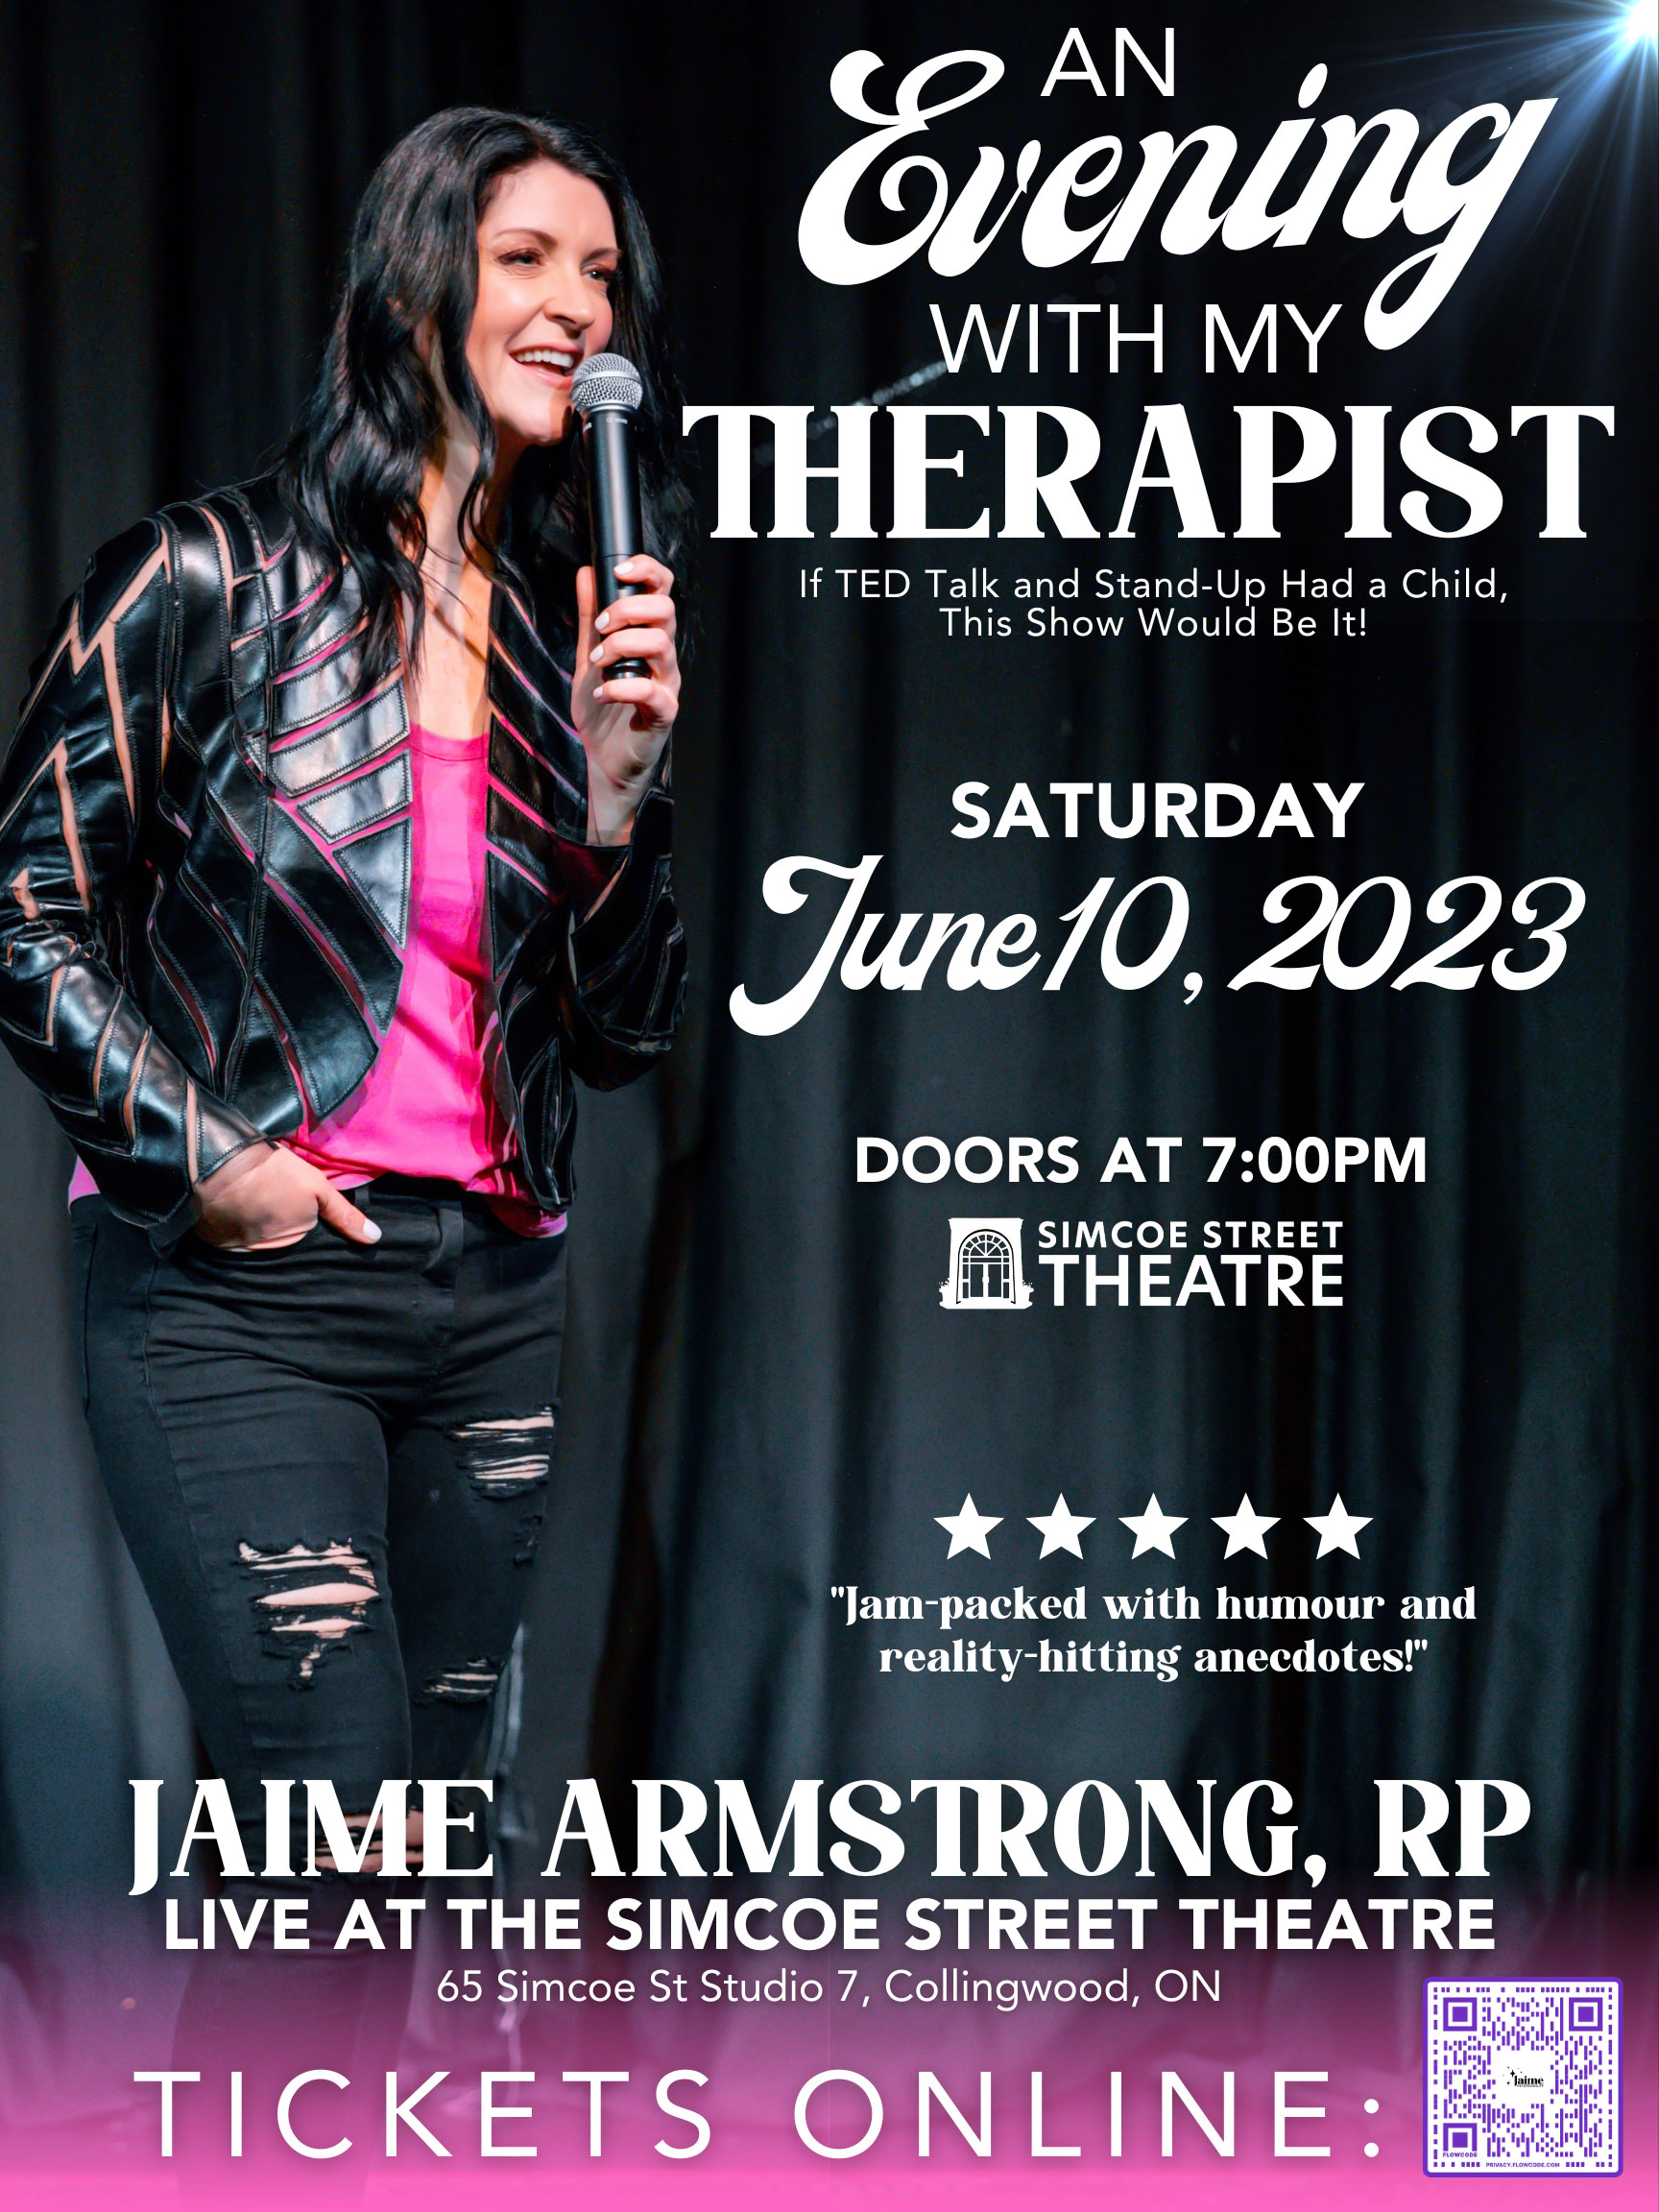 An Evening With My Therapist is a live show and after-show meet and greet rolled into one hilarious and brain-changing evening!